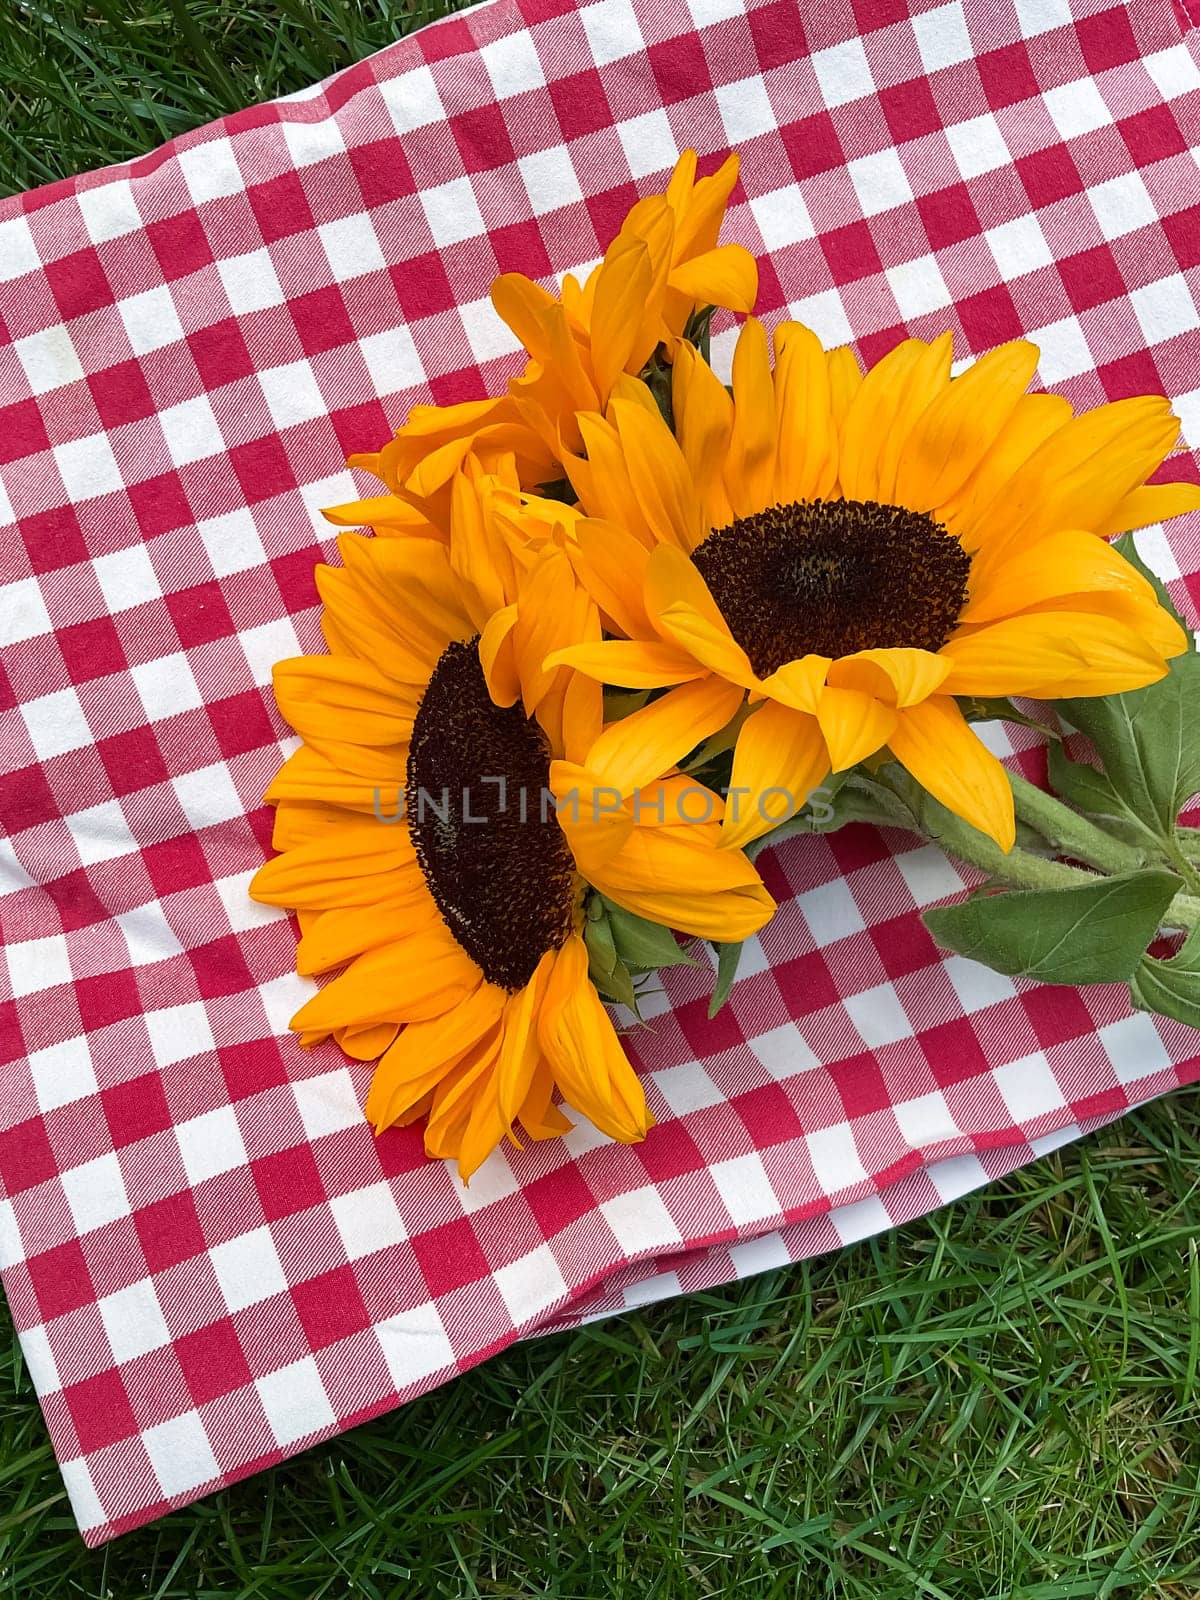 Bright sunflowers on red and white checkered cloth over green grass, picnic concept with a summer vibe for outdoor lifestyle design. ideal for summer themed designs, picnic event promotions, agricultural and gardening content, as well as for lifestyle blog posts, outdoor activity materials, and home decor inspiration. It can also be used in advertising for outdoor products, seasonal greetings, and invitations. by Lunnica